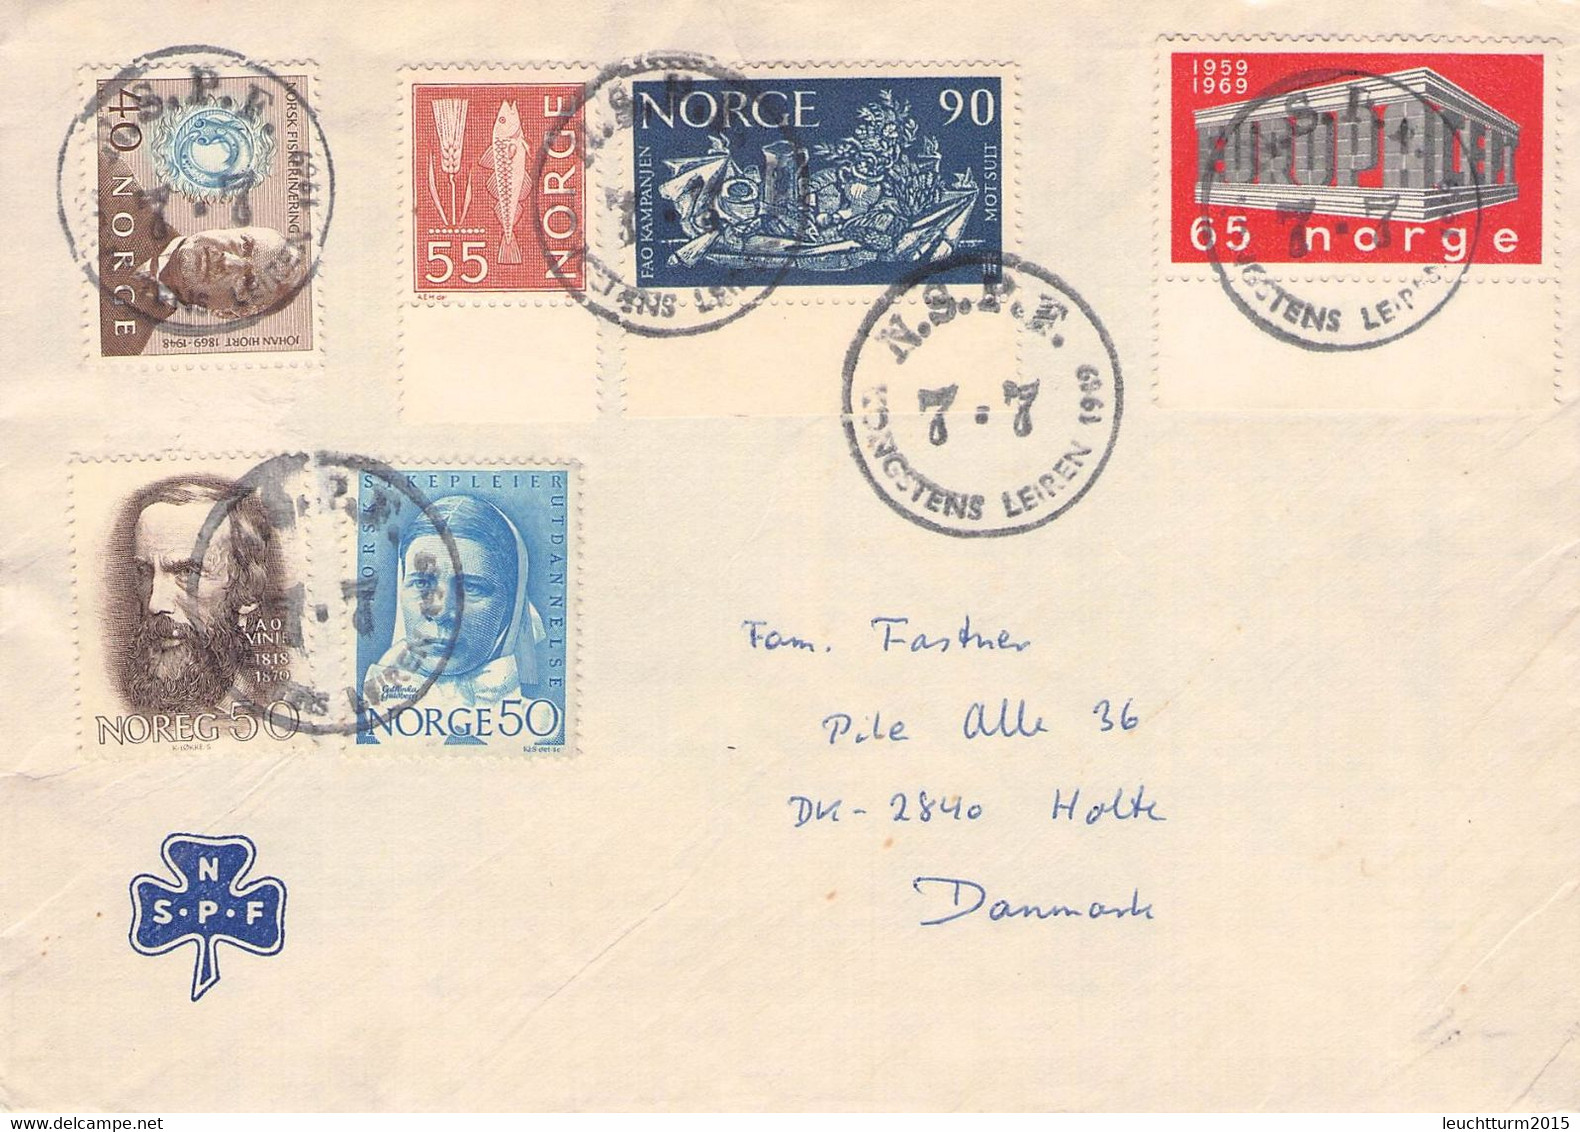 NORWAY - SCOUT SCOOTING 1969 LETTER > HOLTE/DK //QE 235 - Briefe U. Dokumente